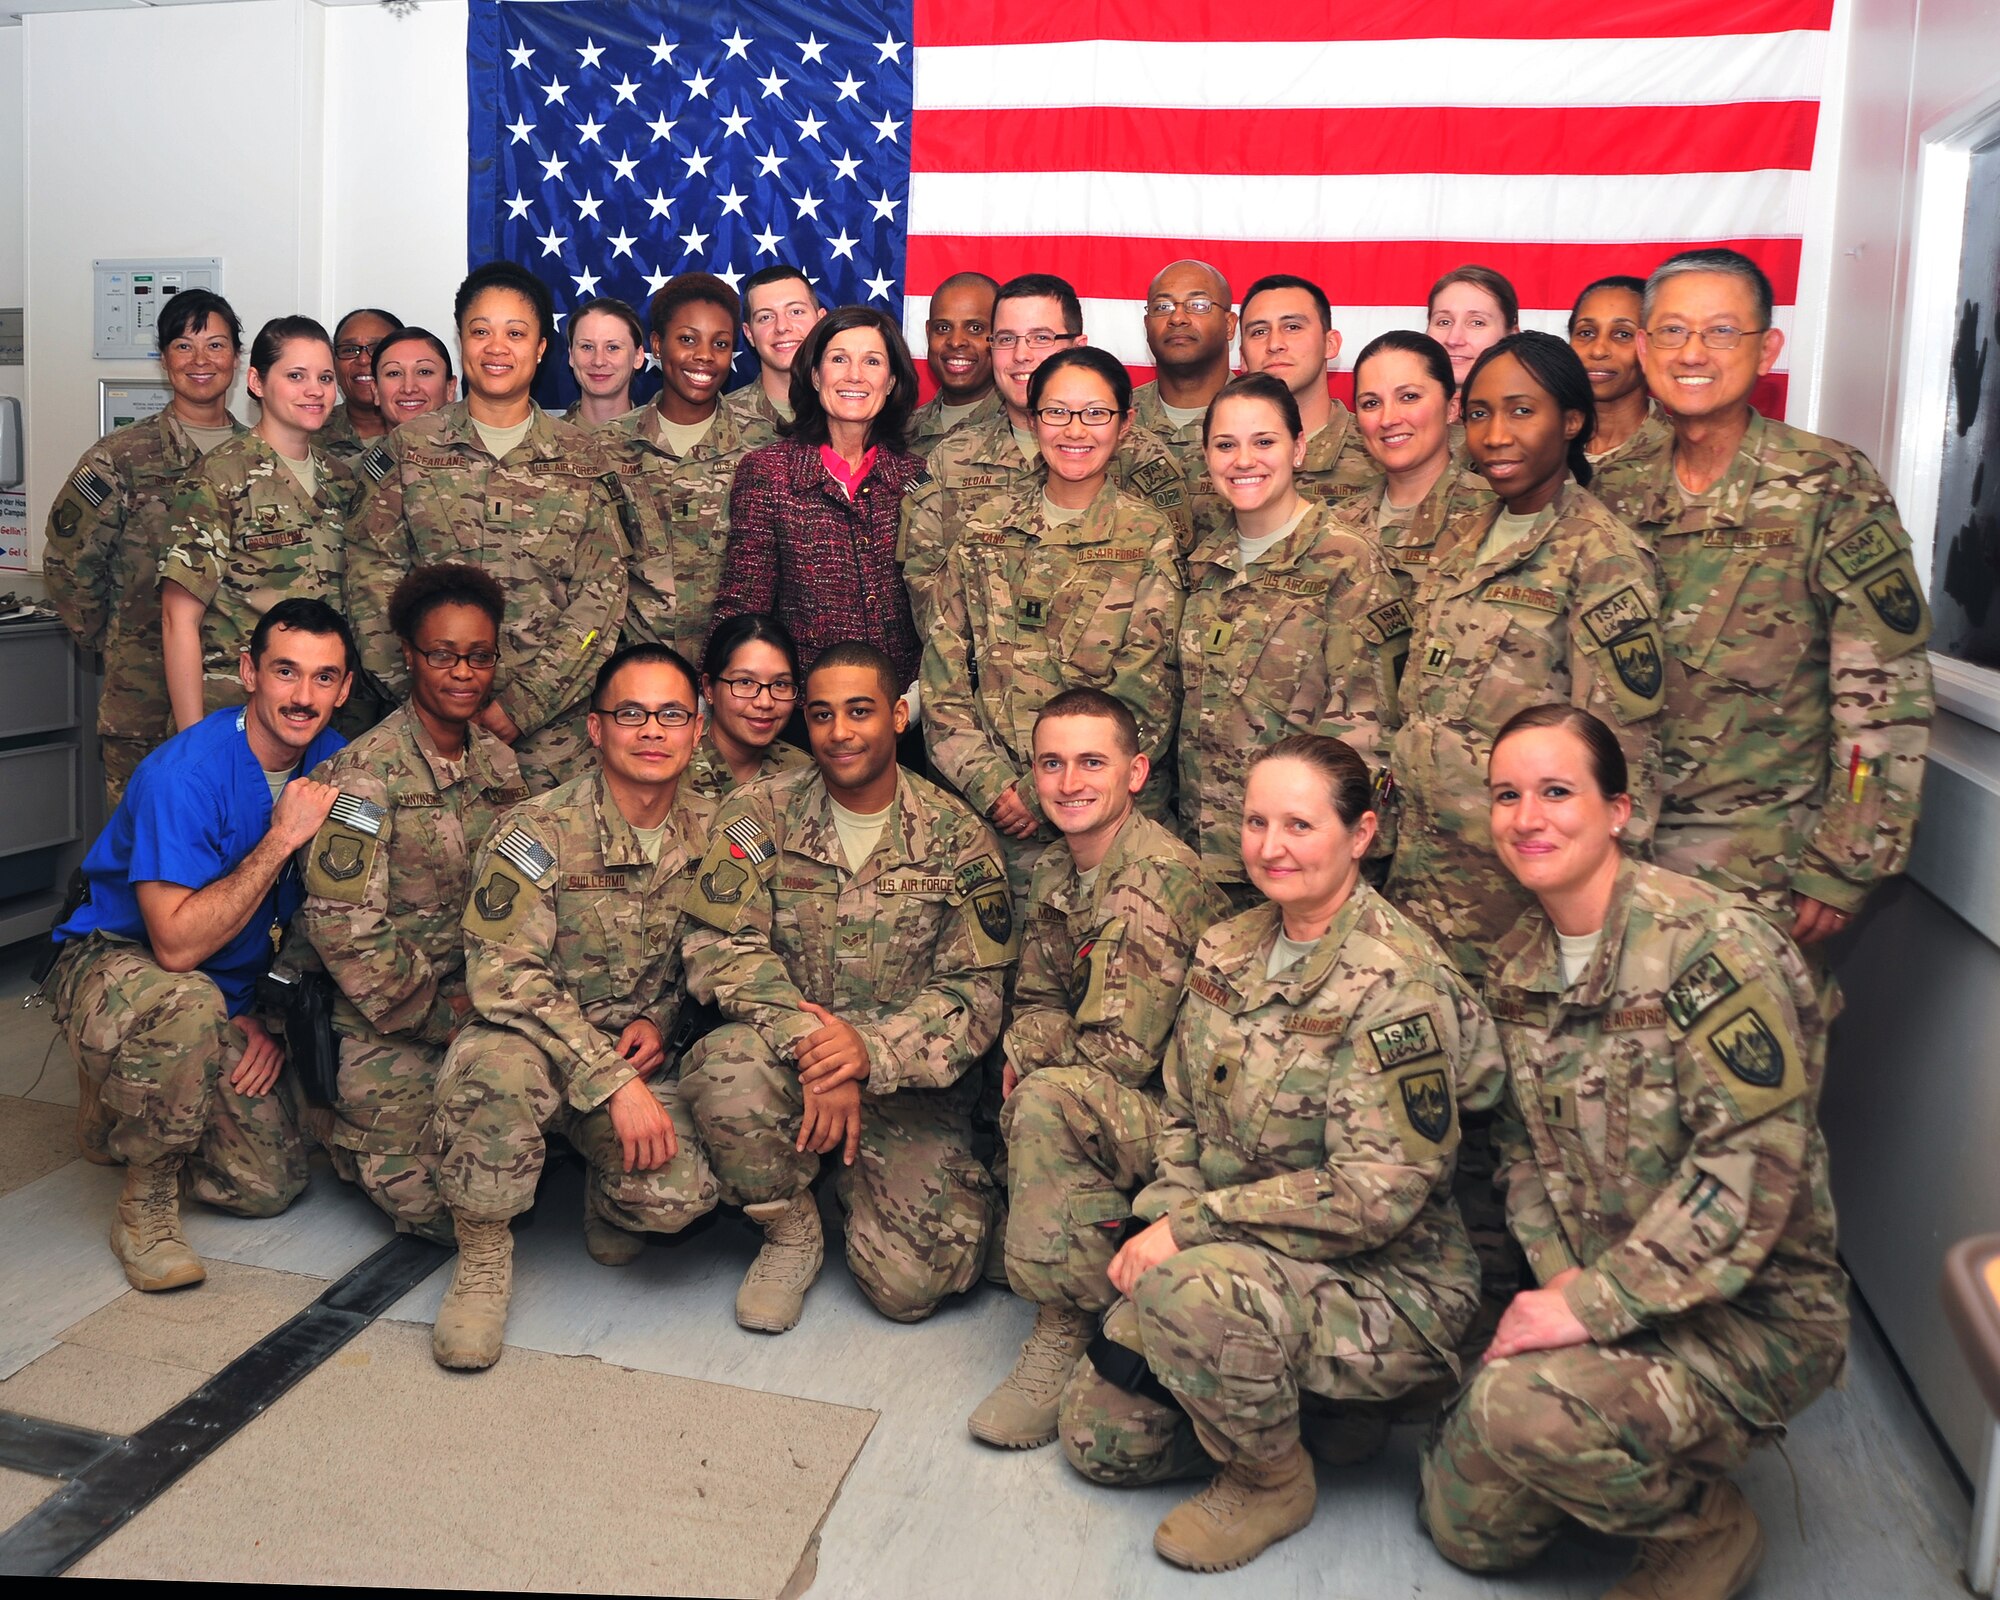 Betty Welsh, wife of U.S. Air Force Chief of Staff Gen. Mark A. Welsh III, poses with Airmen assigned to the 455th Expeditionary Medical Group’s Craig Joint Theater Hospital Dec. 15, 2014 during a visit to Bagram Airfield, Afghanistan. Mrs. Welsh also connected with Airmen from the 455th Expeditionary Aeromedical Evacuation Squadron during her visit. (U.S. Air Force photo by Staff Sgt. Whitney Amstutz/released)